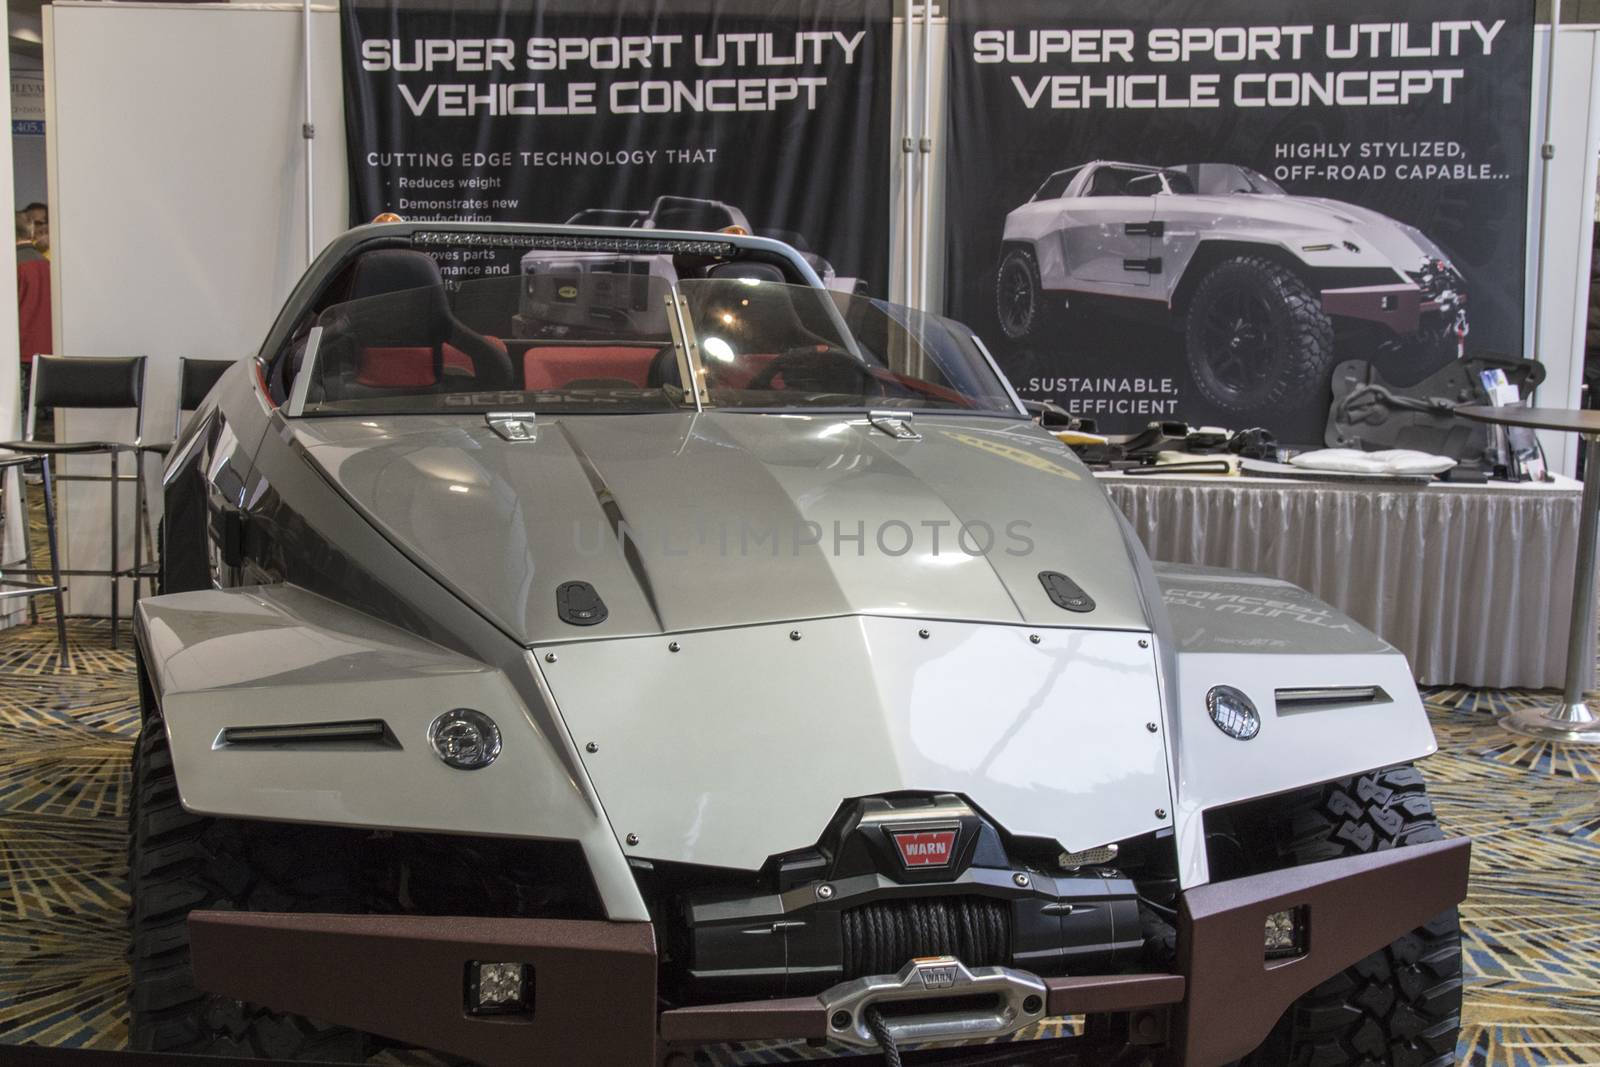 DETROIT - JANUARY 17 :Suer sport utlity vehicle concept at The North American International Auto Show January 17, 2016 in Detroit, Michigan.